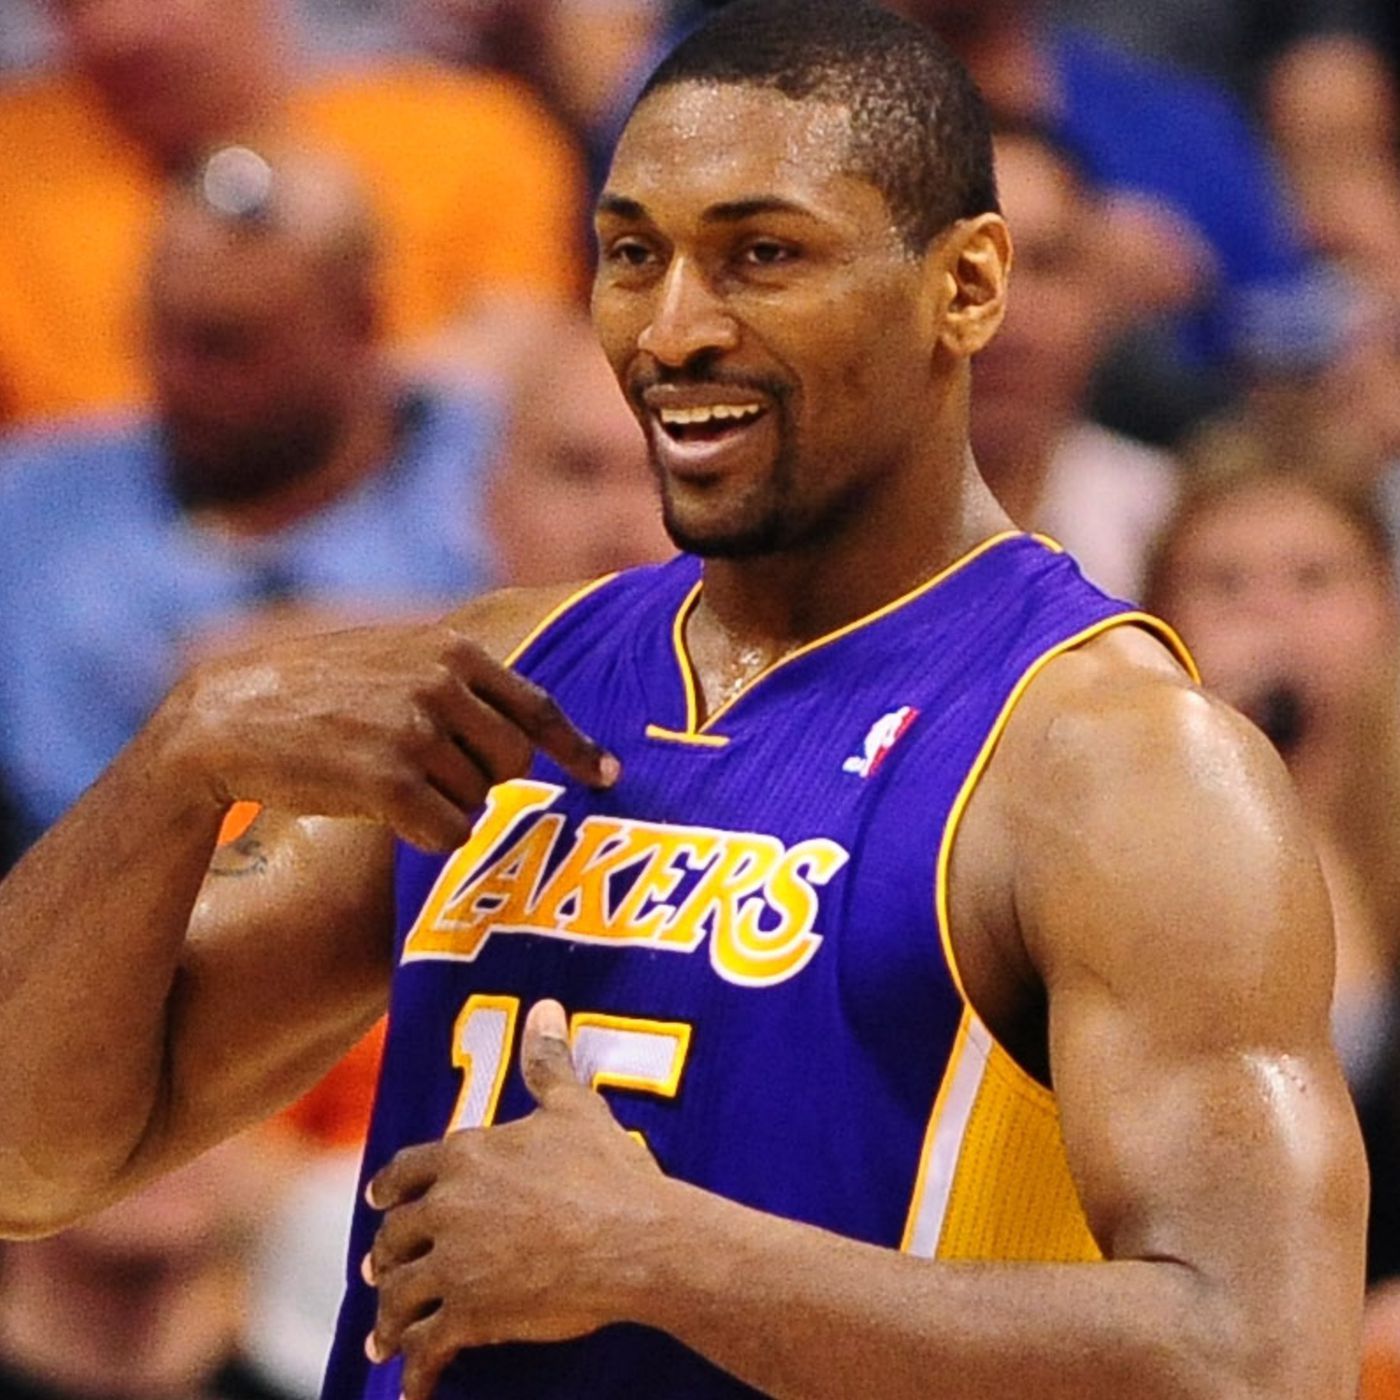 Ron Artest Applied For Job At Best Buy During His Rookie Season To Get ...